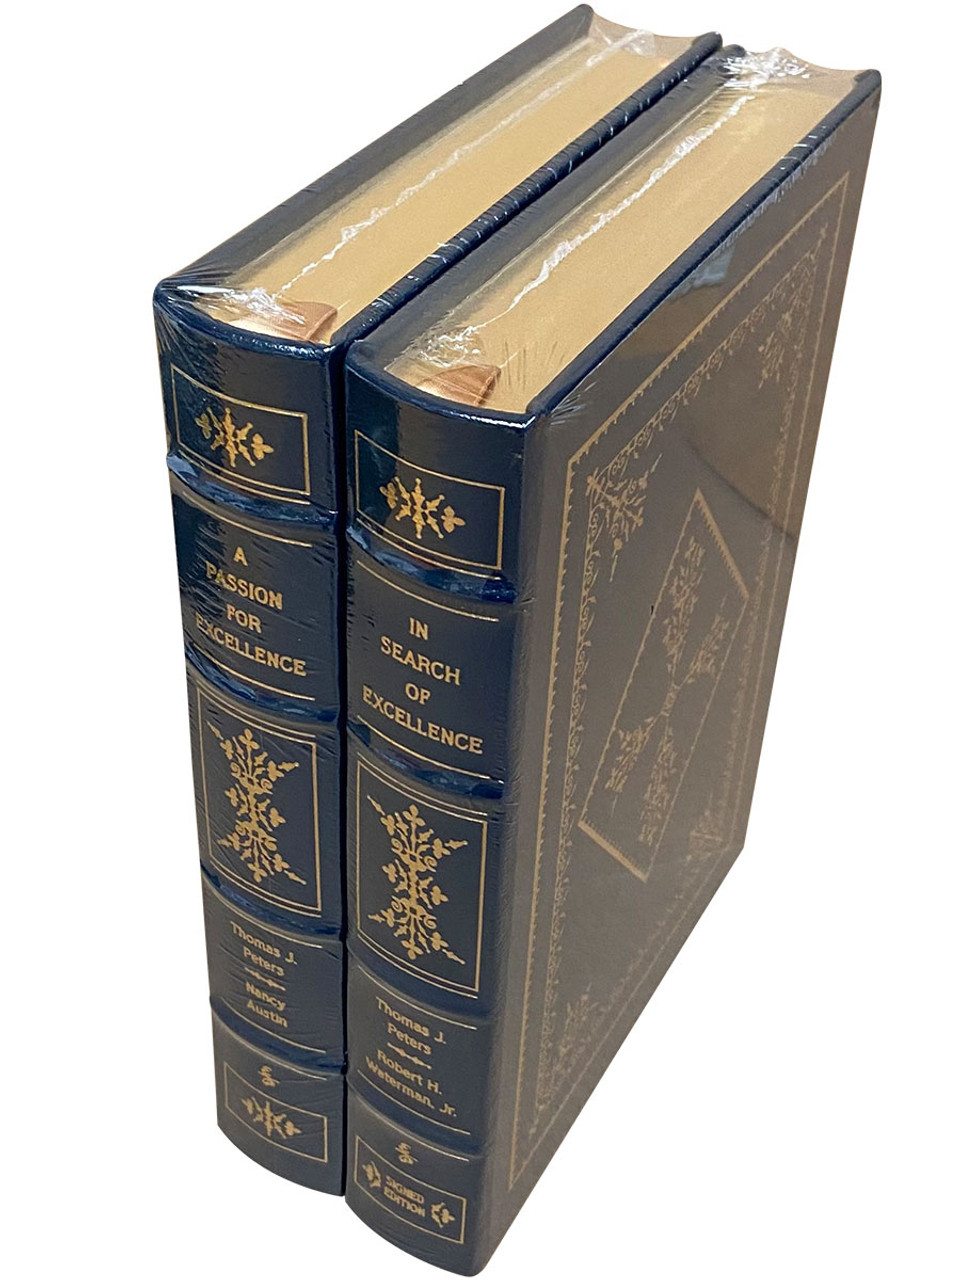 Thomas J. Peters and Robert H. Waterman Jr. "In Search Of Excellence",  "A Passion For Excellence" Signed Limited Edition, Leather Bound Collector's Edition 2-Vol. Matched Set w/COA [Sealed]